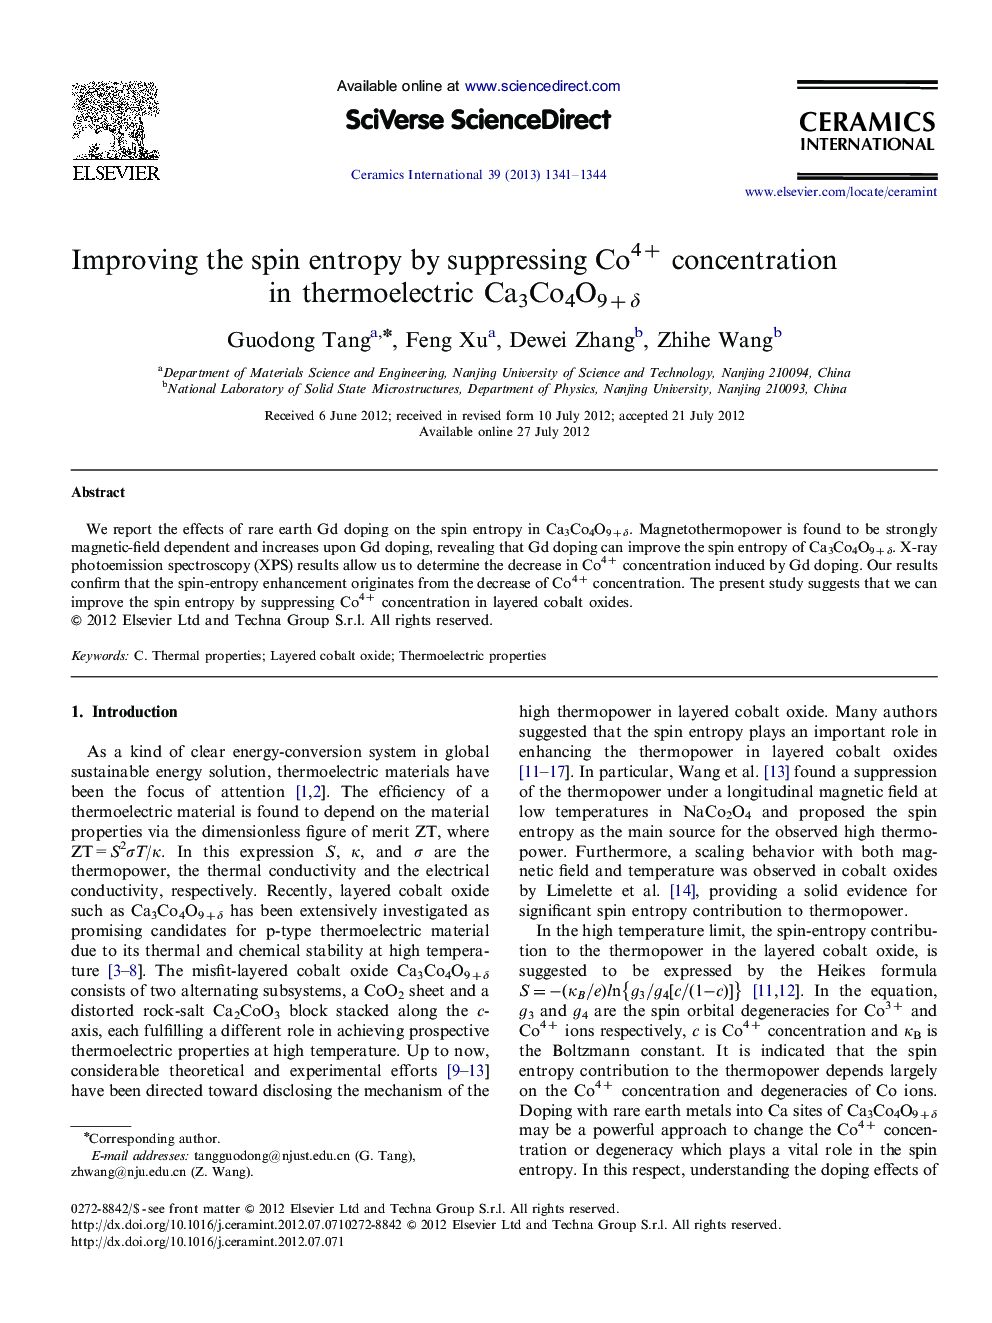 Improving the spin entropy by suppressing Co4+ concentration in thermoelectric Ca3Co4O9+δ